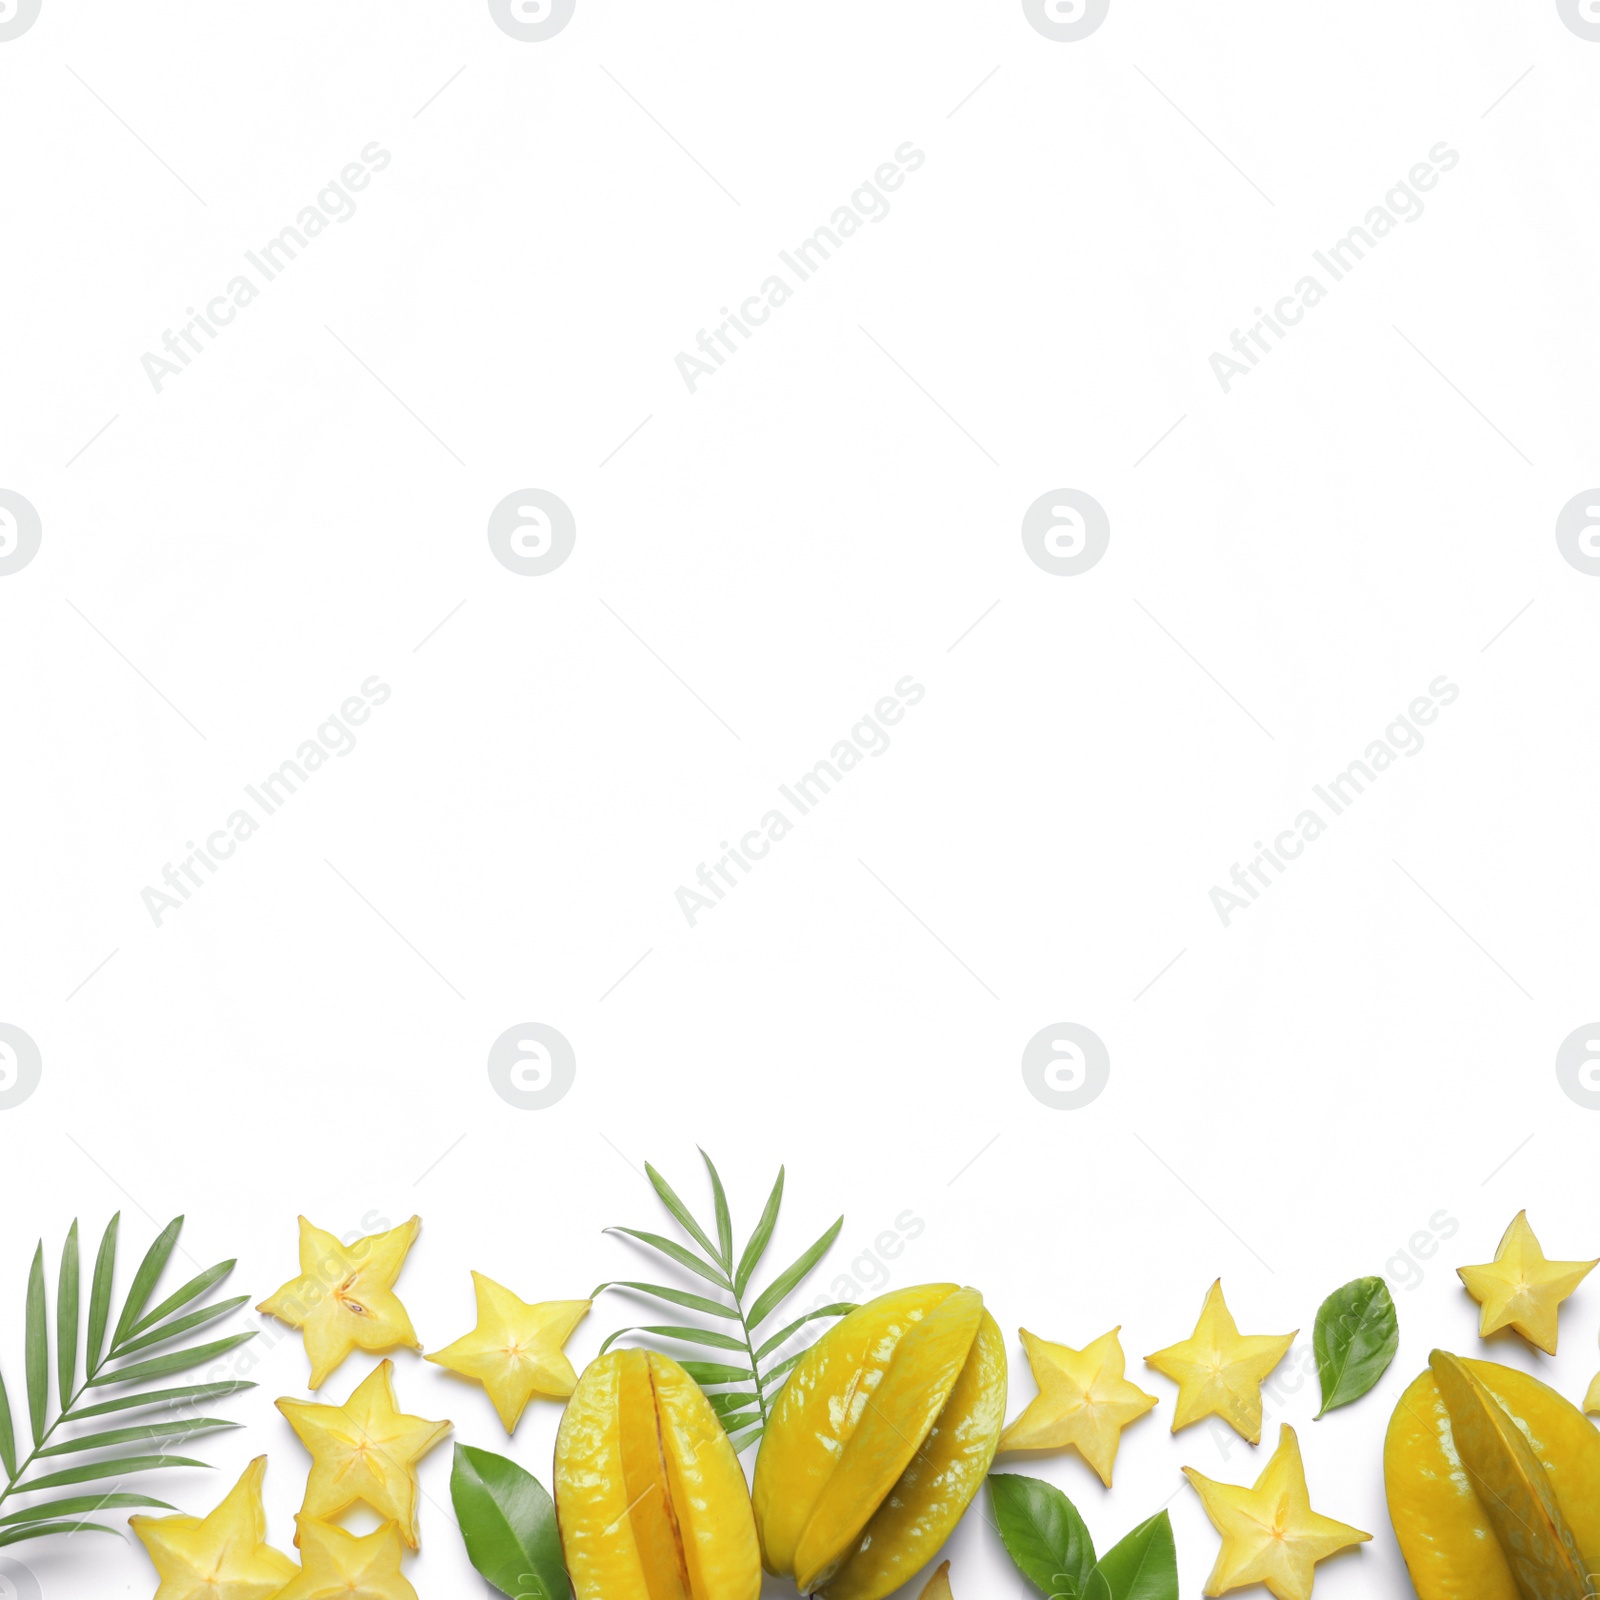 Photo of Delicious carambola fruits and leaves on white background, flat lay